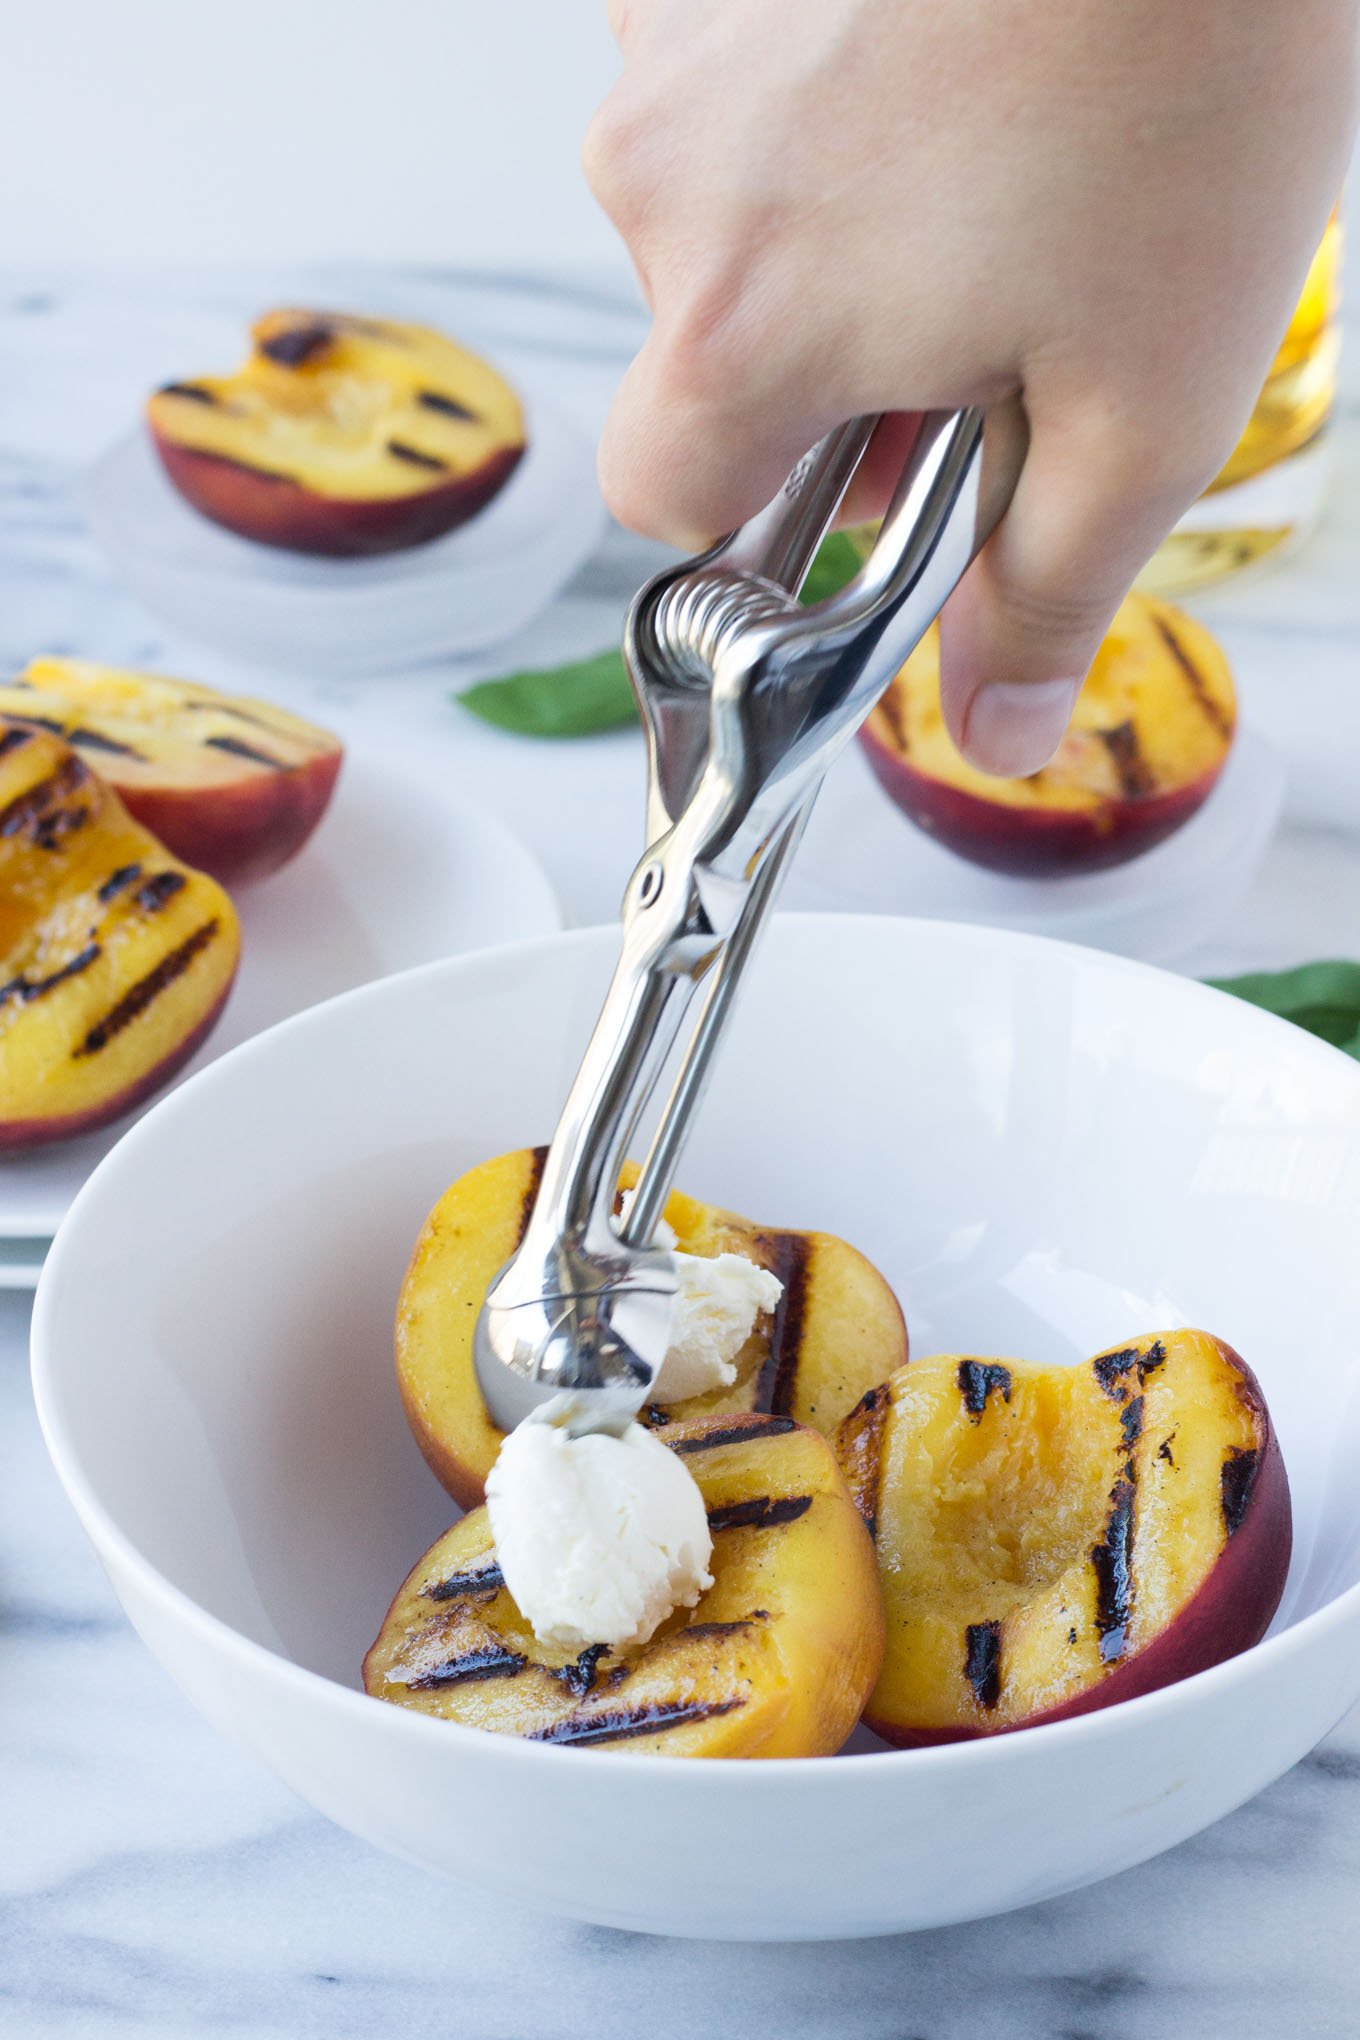 Mascarpone Grilled Peaches with Honey Sauce